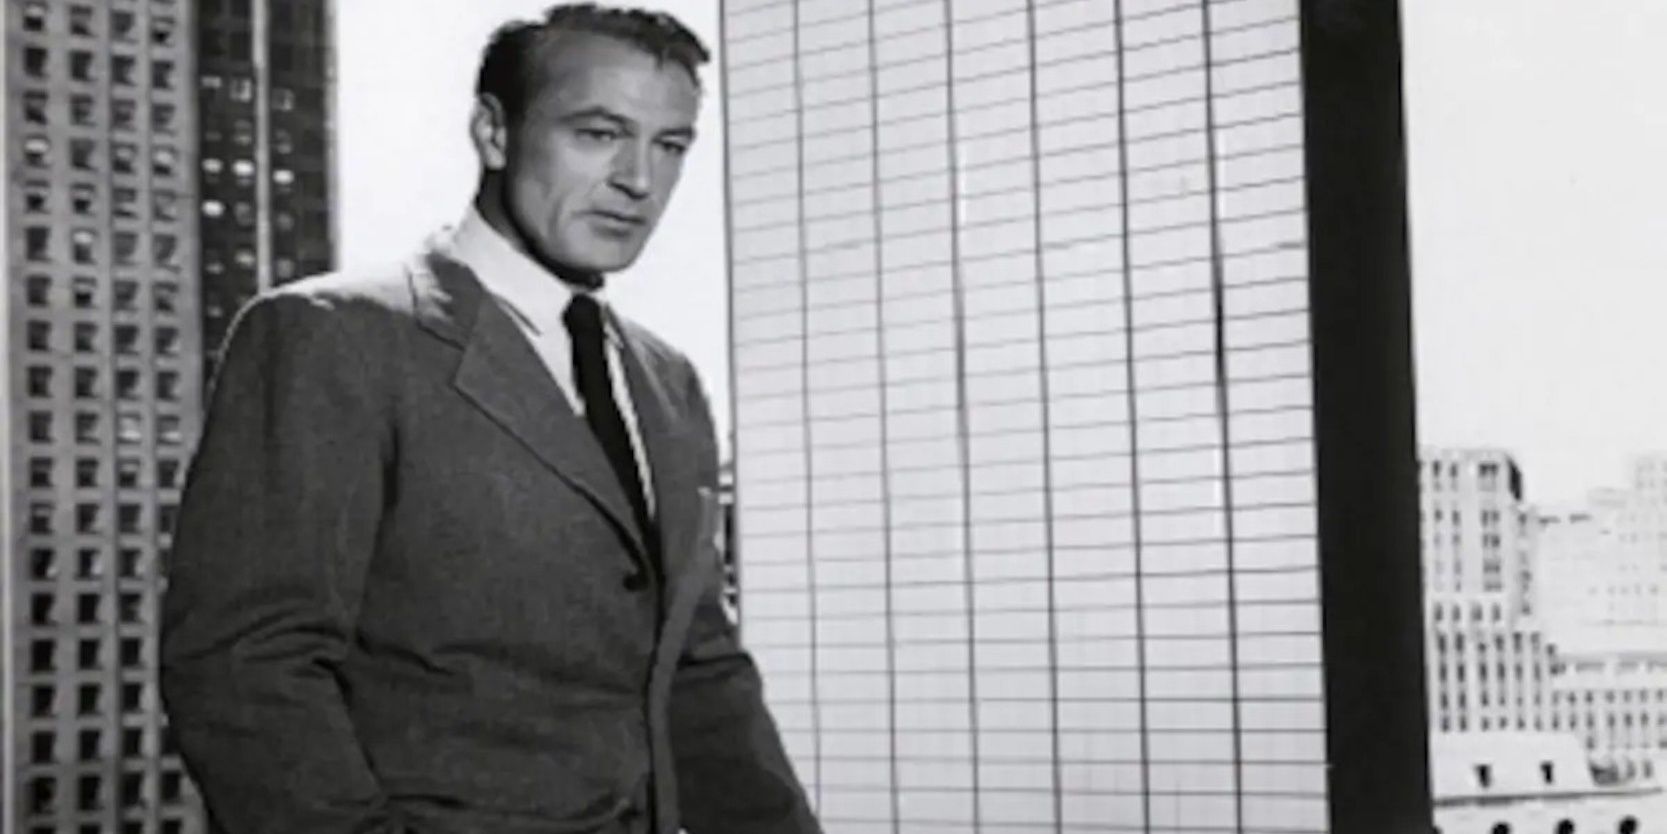 Cary Cooper as Howard Roarke standing in front of building model in The Fountainhead